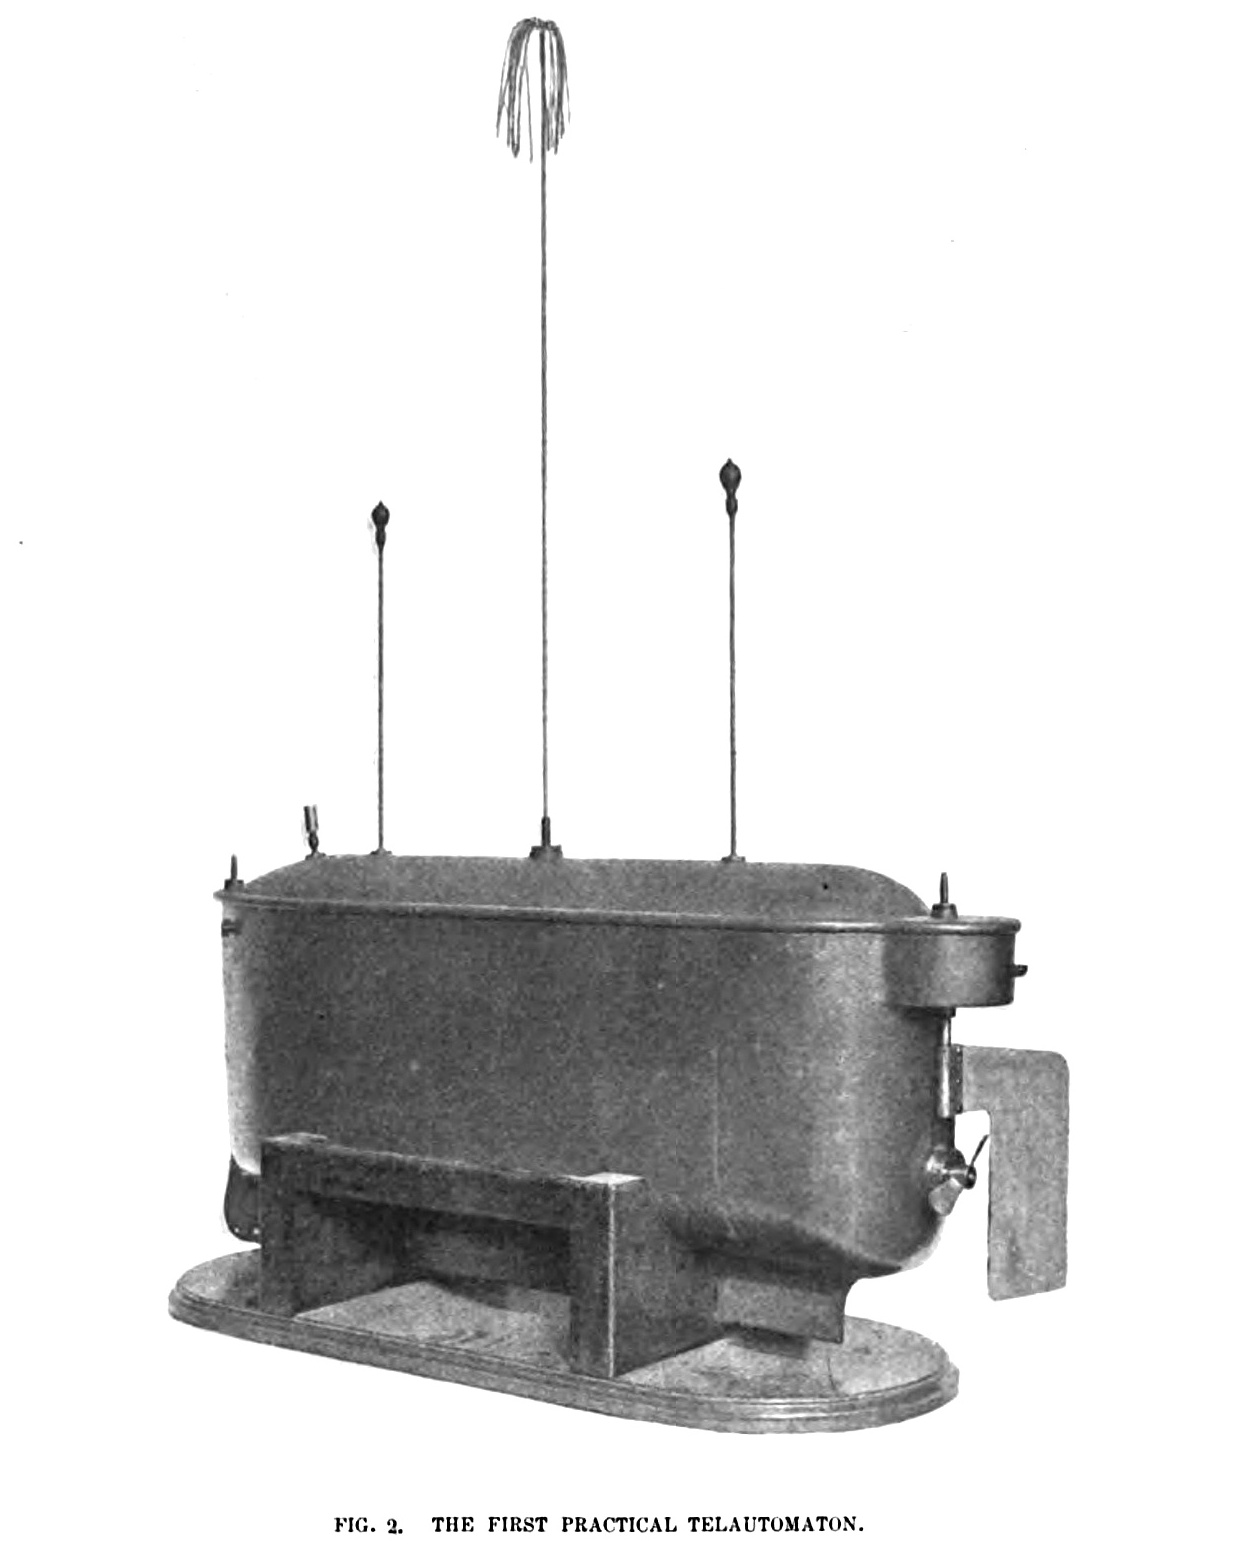 FIG. 2. The First Practical Telautomaton. A machine having all its bodily or translatory movements and the operations of the interior controlled from a distance without wires. The crewless boat shown in the photograph contains its own motive power, propelling- and steering-machinery, and numerous other accessories, all of which are controlled by transmitting from a distance, without wires, electrical oscillations to a circuit carried by the boat and adjusted to respond only to these oscillations.